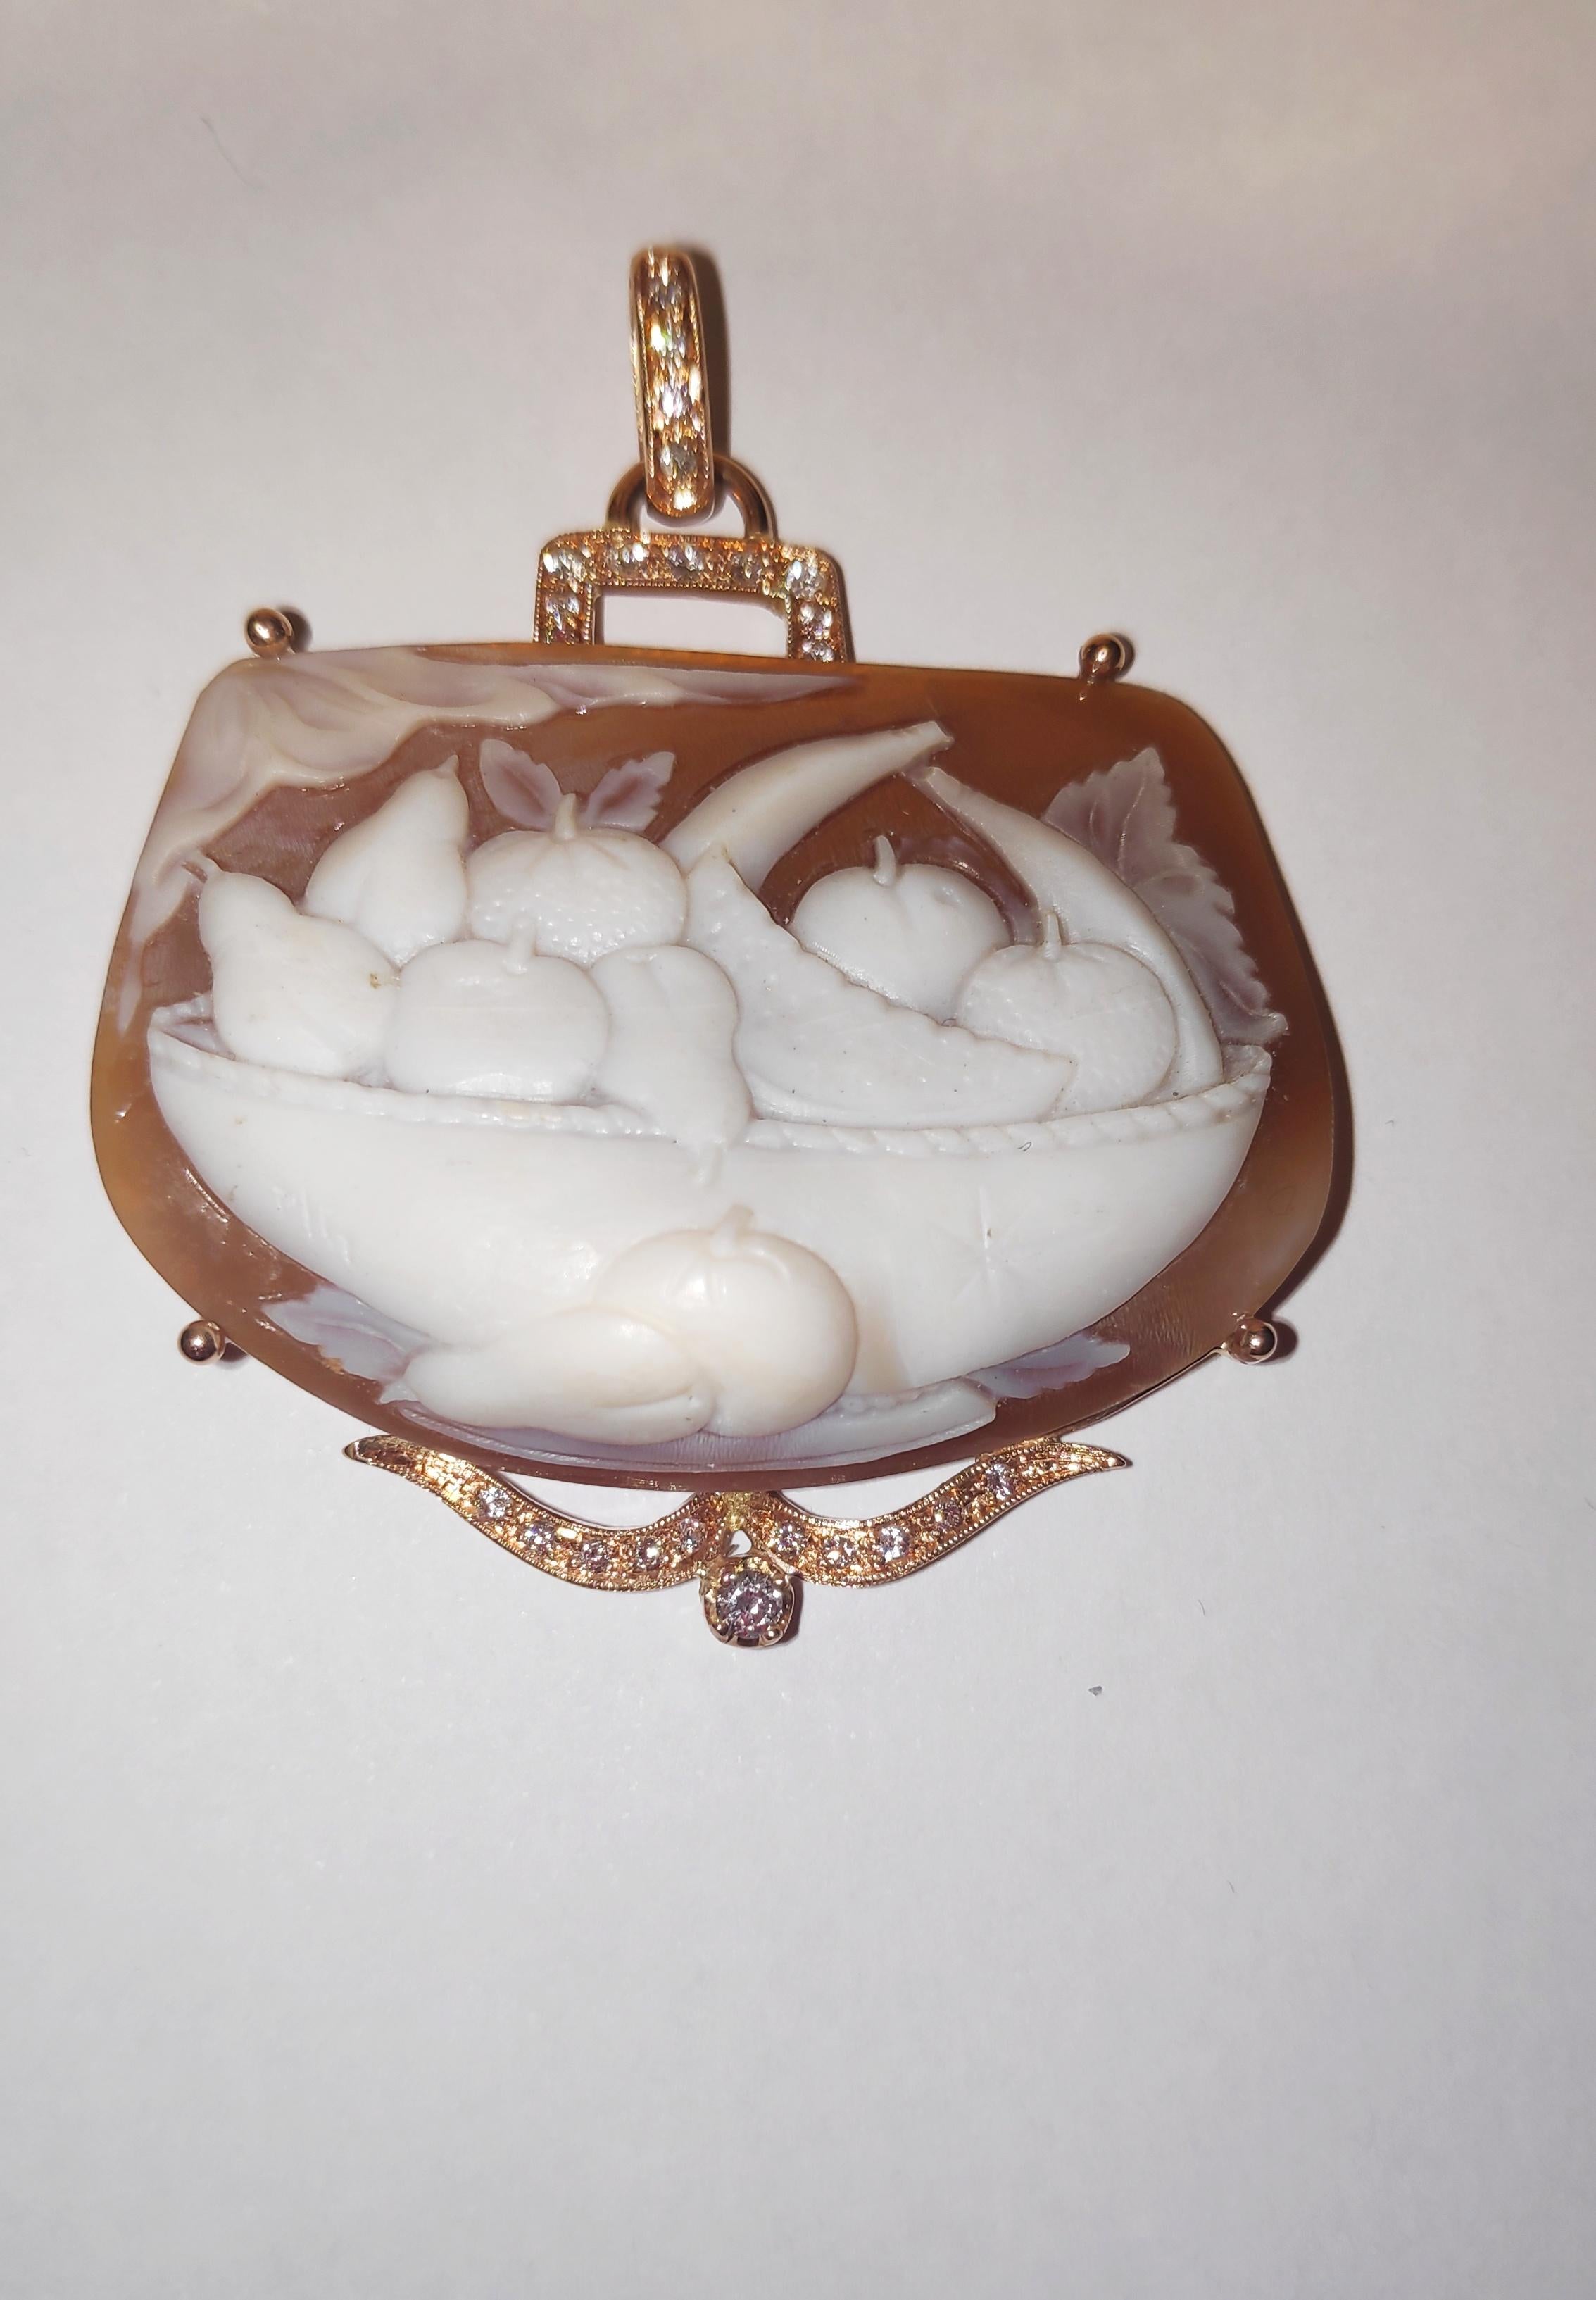 Carved shell Cameo with fruits Pendant 12kt pink gold with diamonds .
Offered here is a large shell cameo set in a fabulous 12K gold hand made frame with 0,50 ct diamonds.
This museum quality cameo depicts a basket with fruits in relief. It is